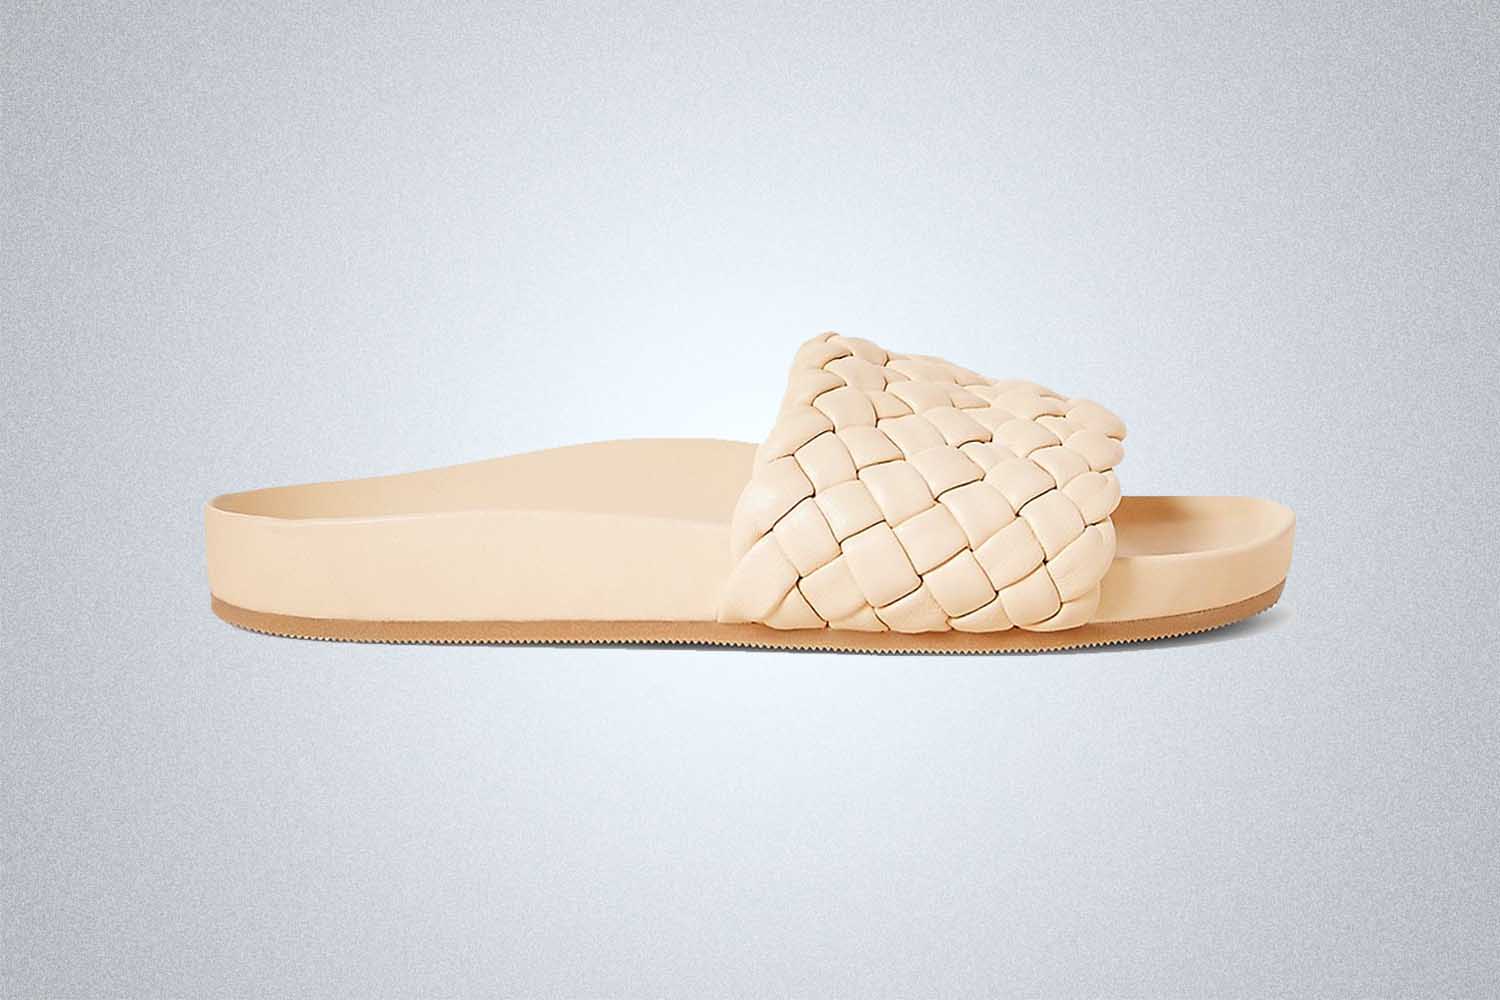 Loeffler Randall Sonnie Woven Leather Slides, now on sale